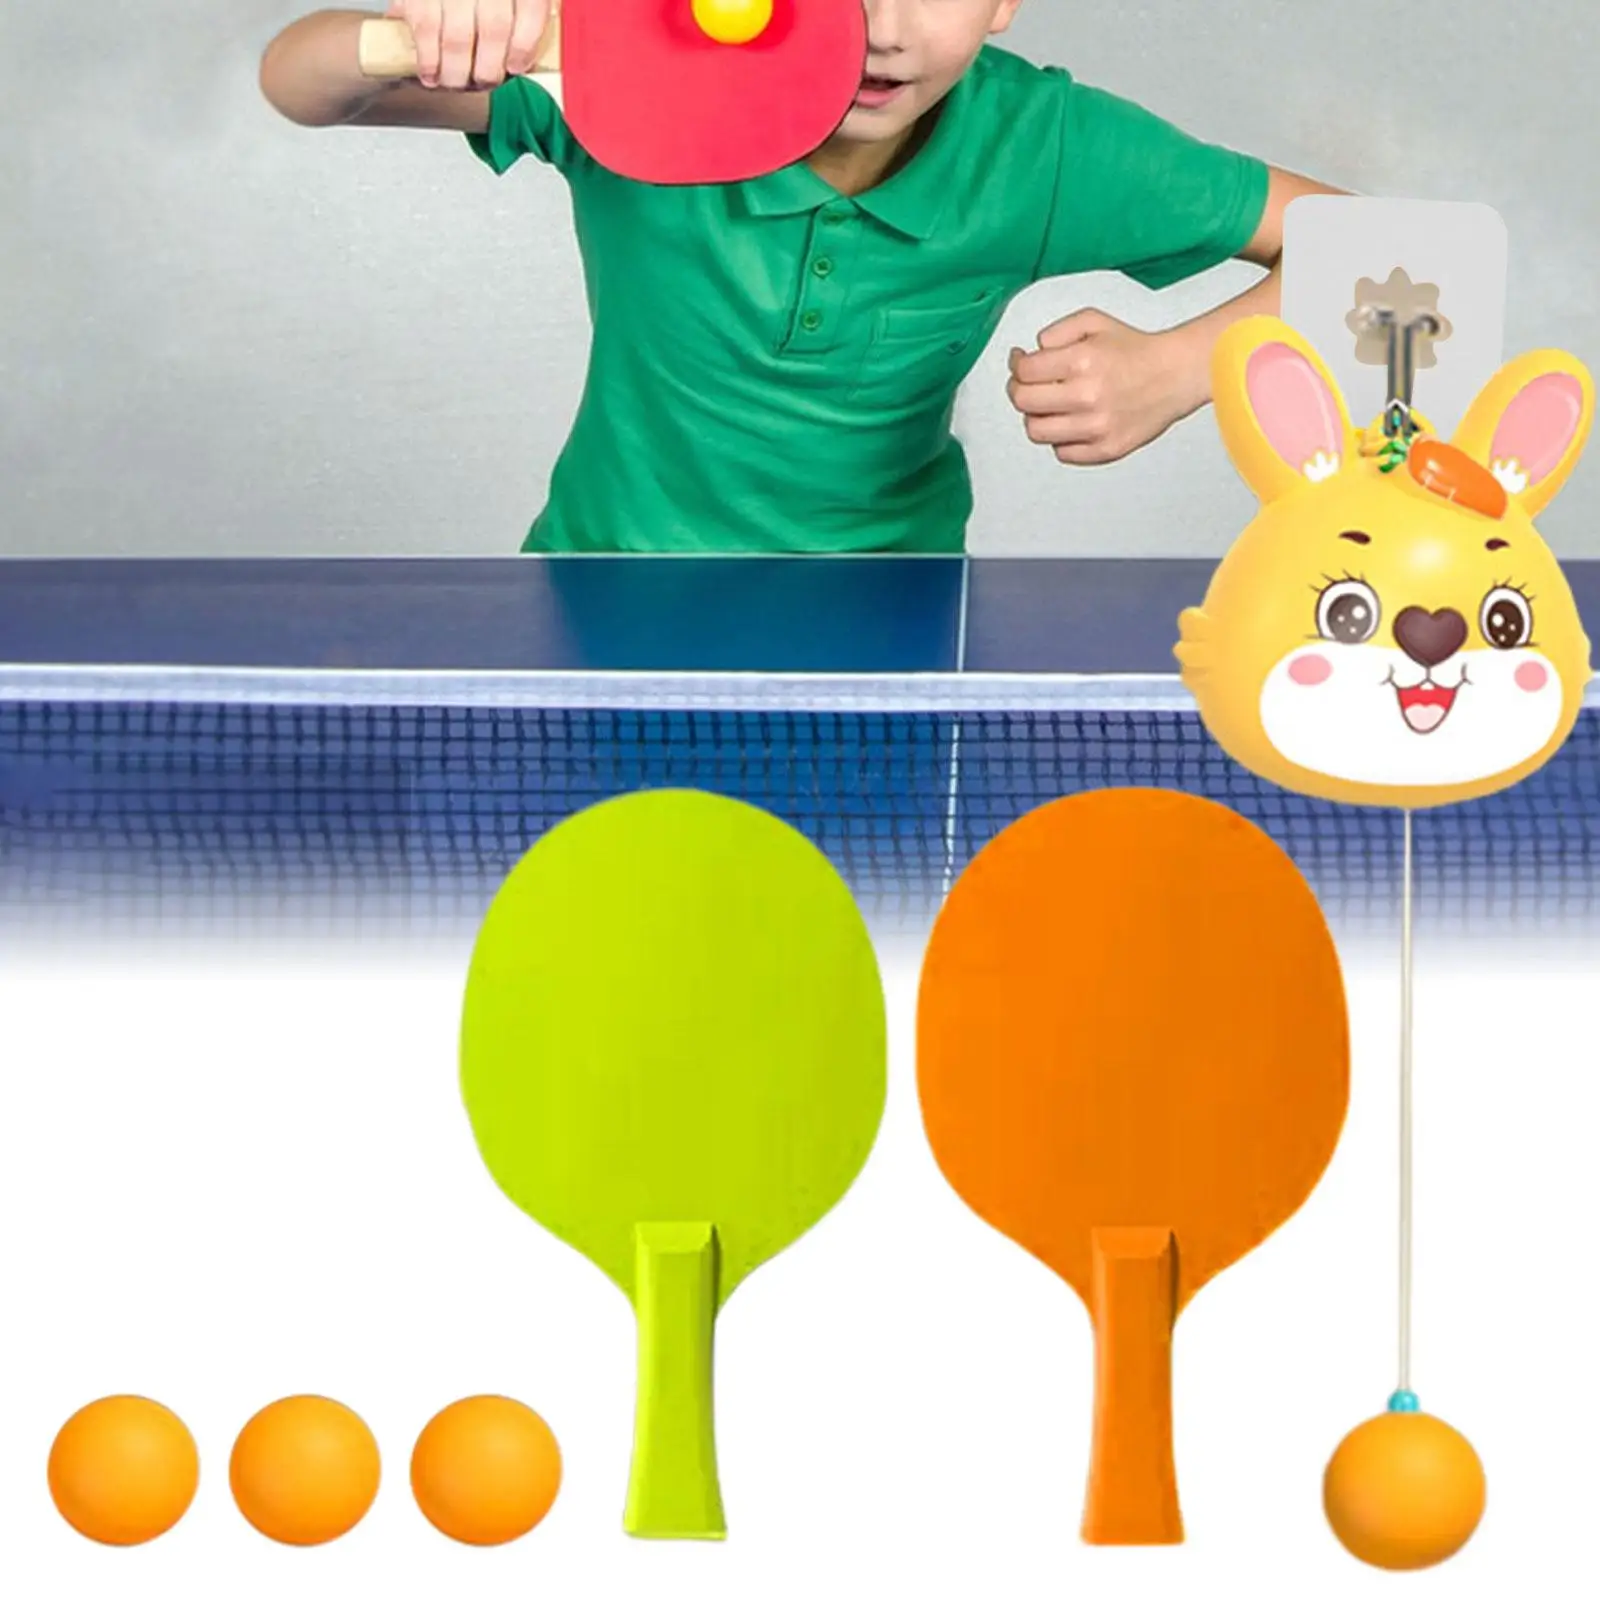 Indoor Hanging Table Self Training No Need Table Tennis Practice Equipment for Adults Kids